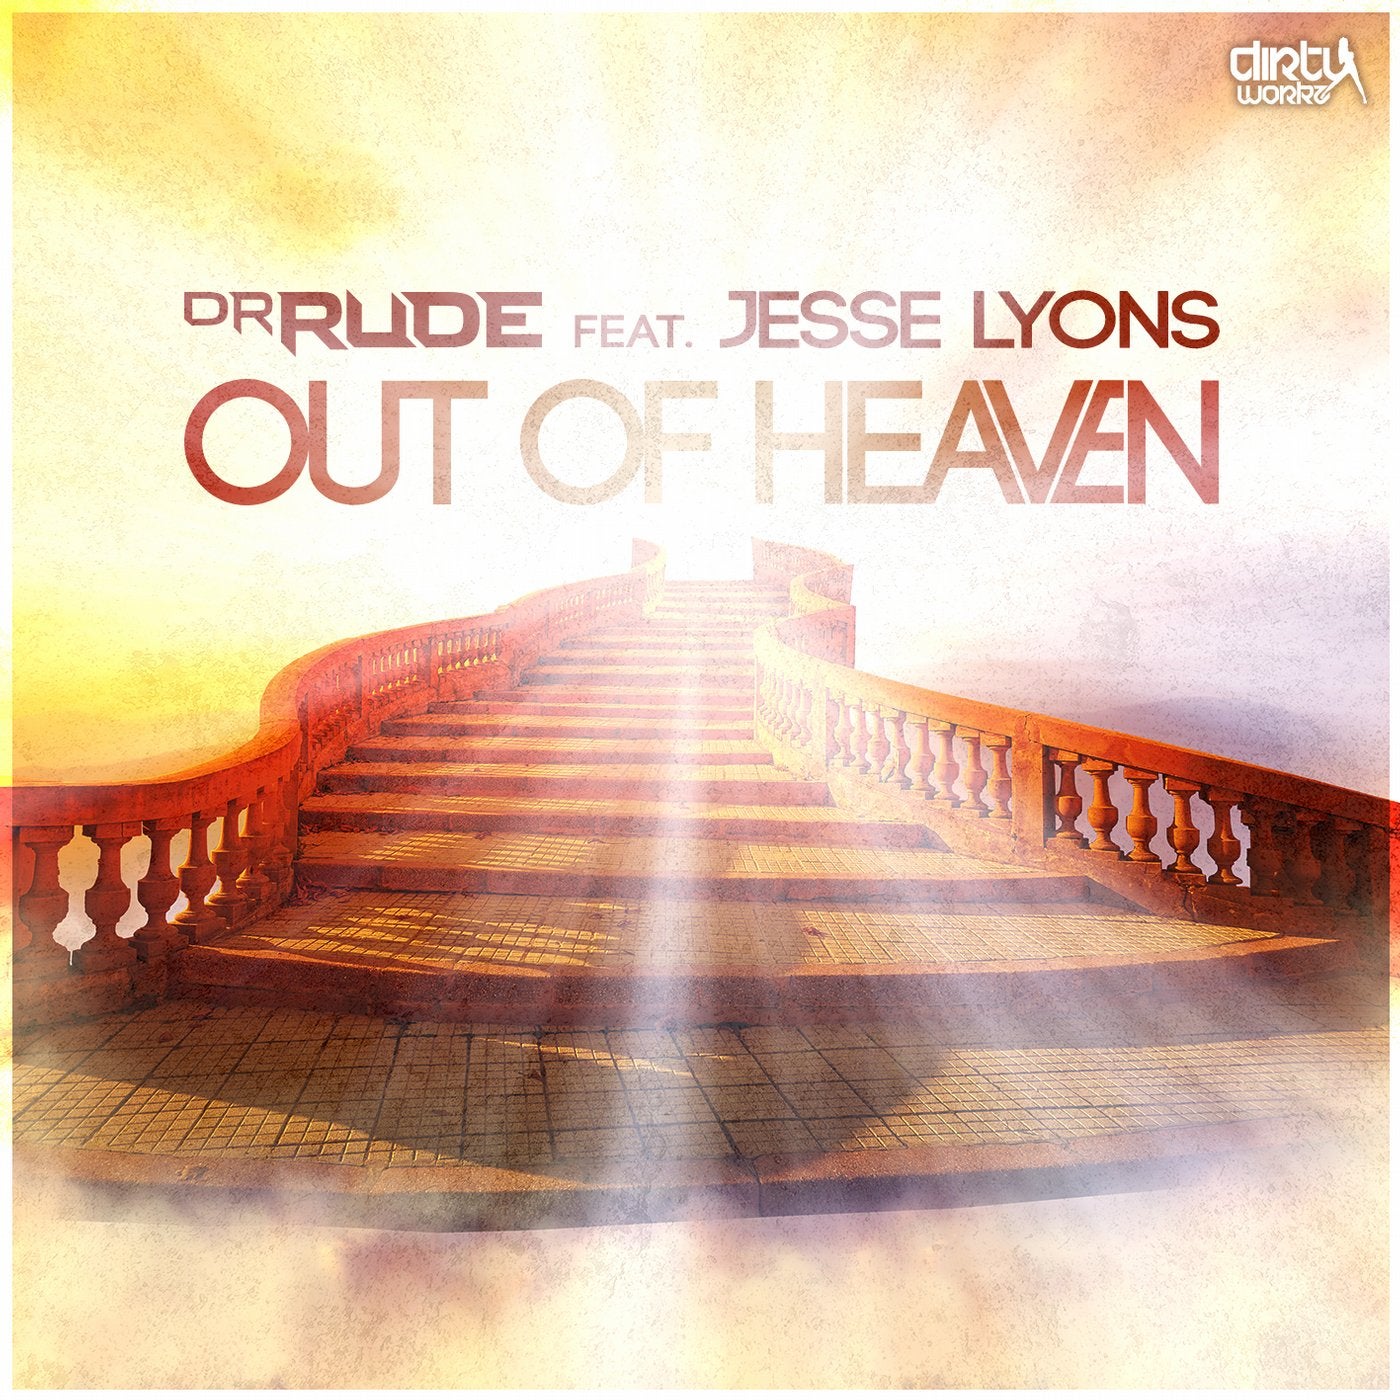 Out of Heaven. Out песни. Look out of Heaven обложка. Look out of Heaven обложка песни. Feat jess